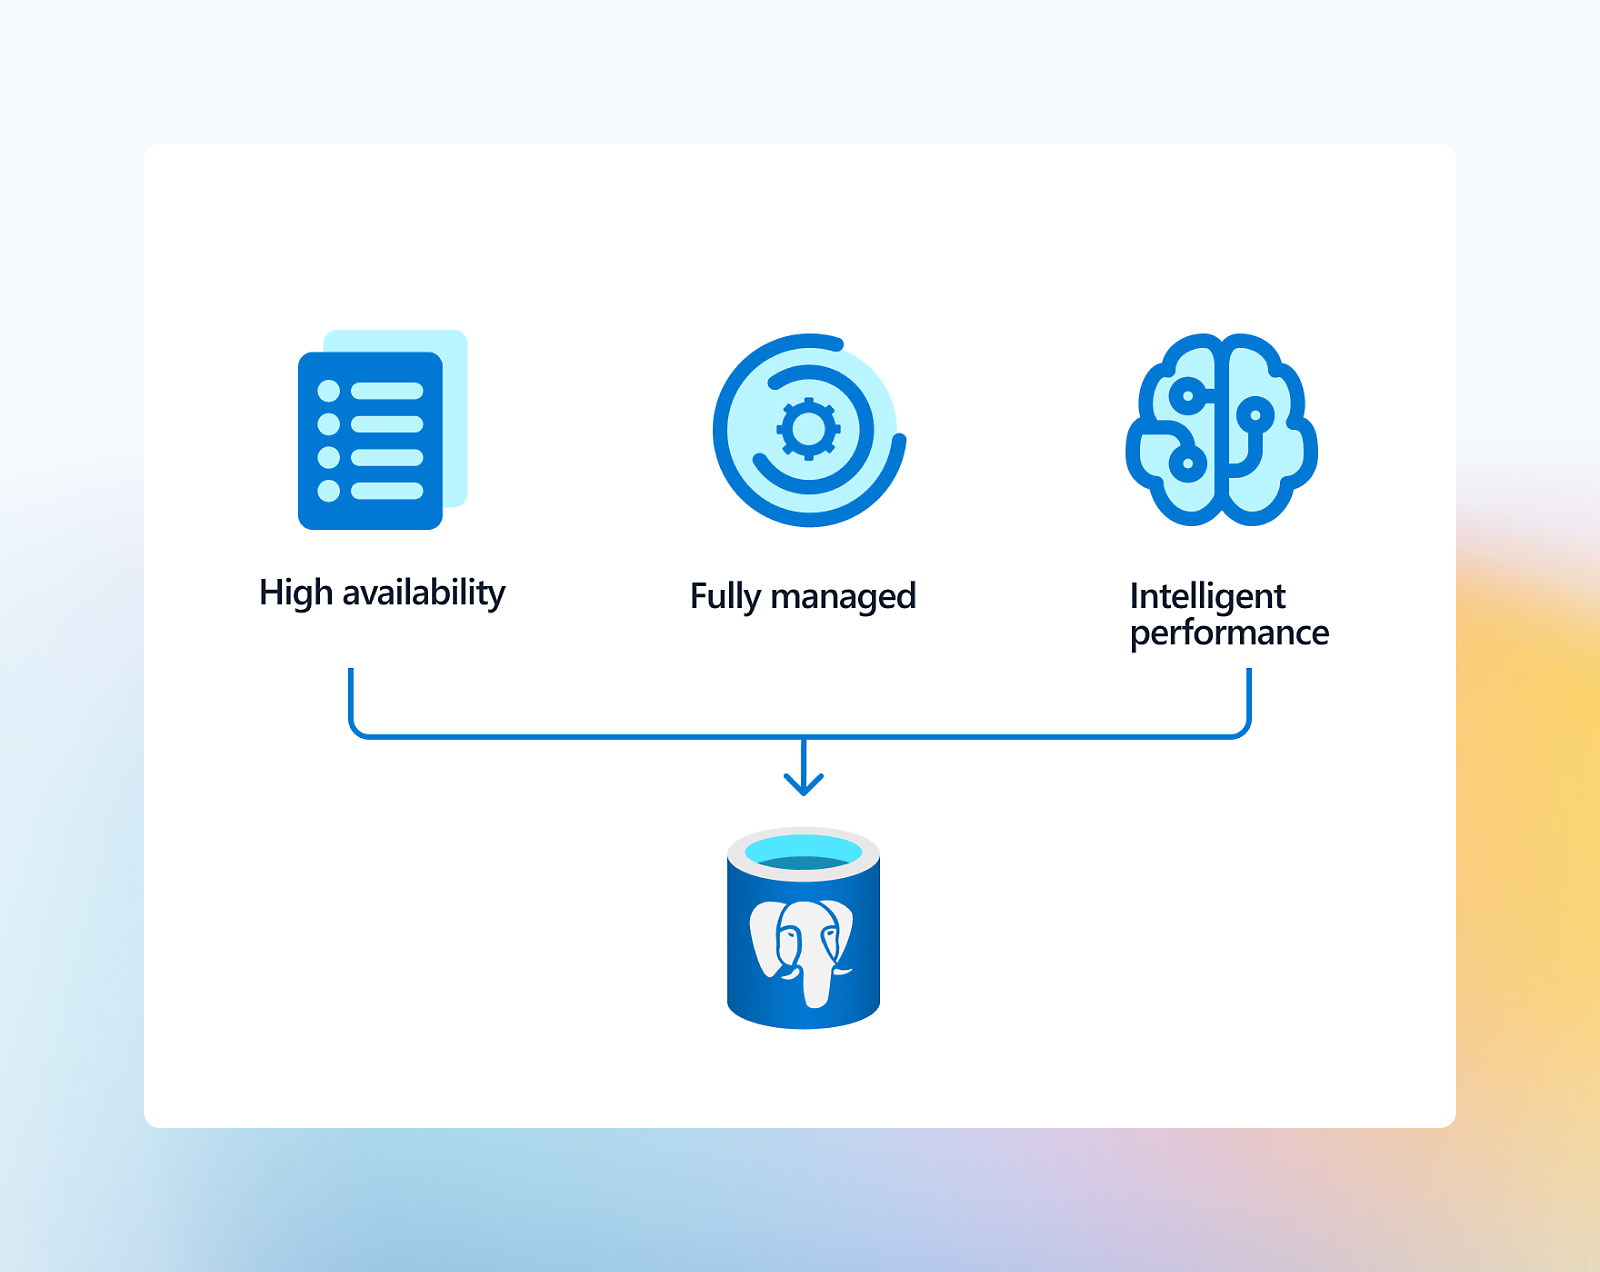 Graphic showing three icons labeled "high availability," "fully managed," and "intelligent performance